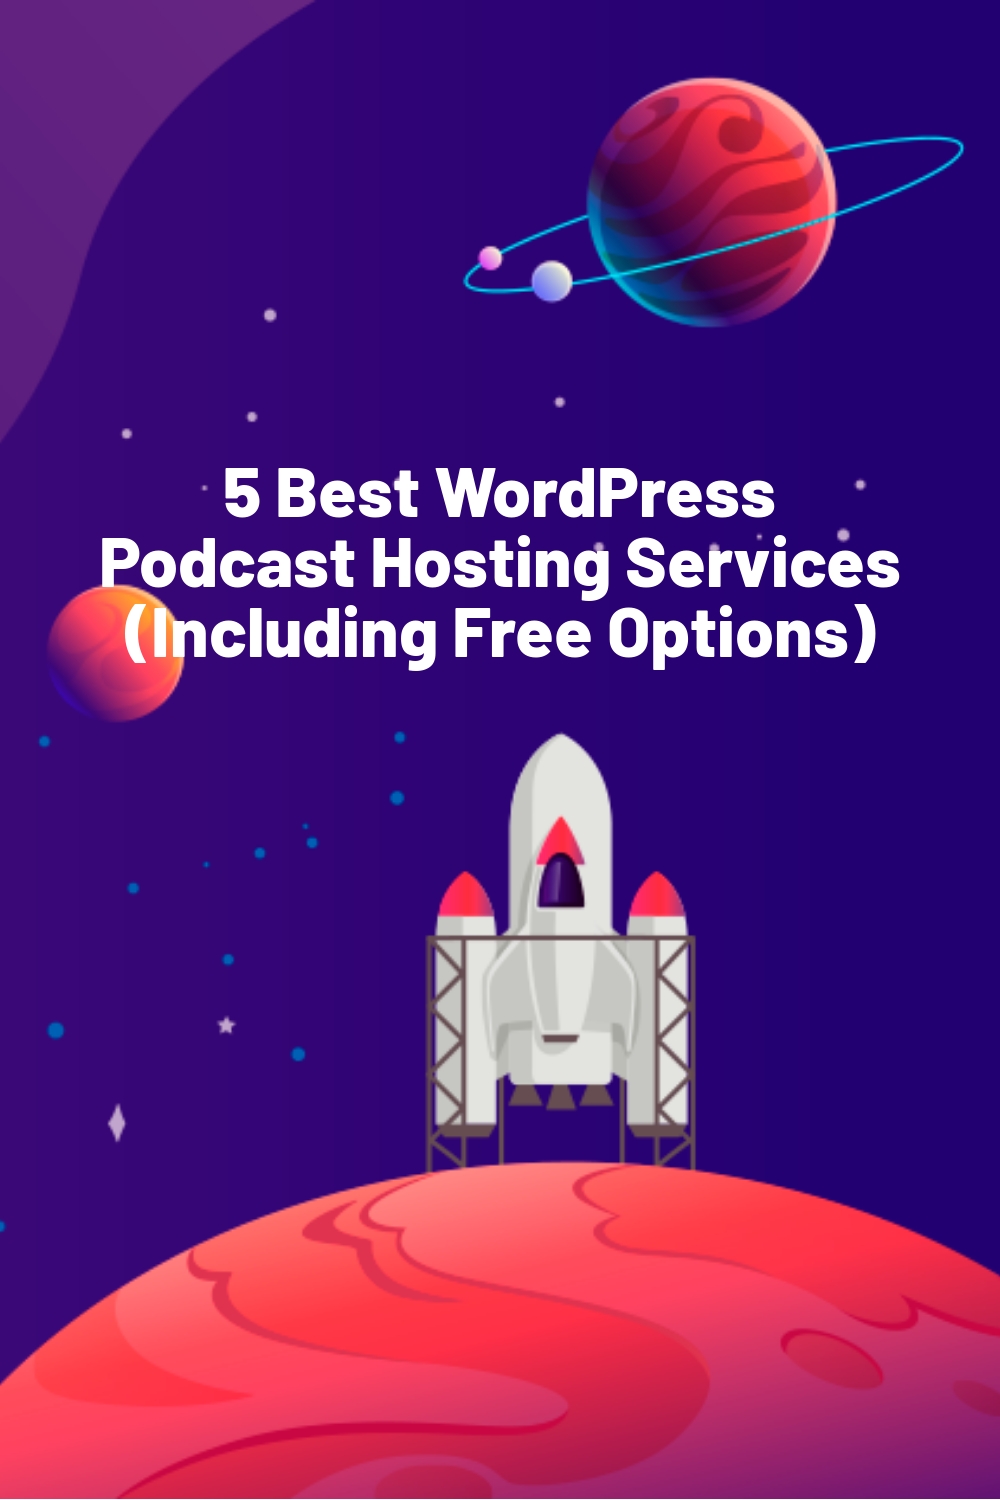 5 Best WordPress Podcast Hosting Services (Including Free Options)